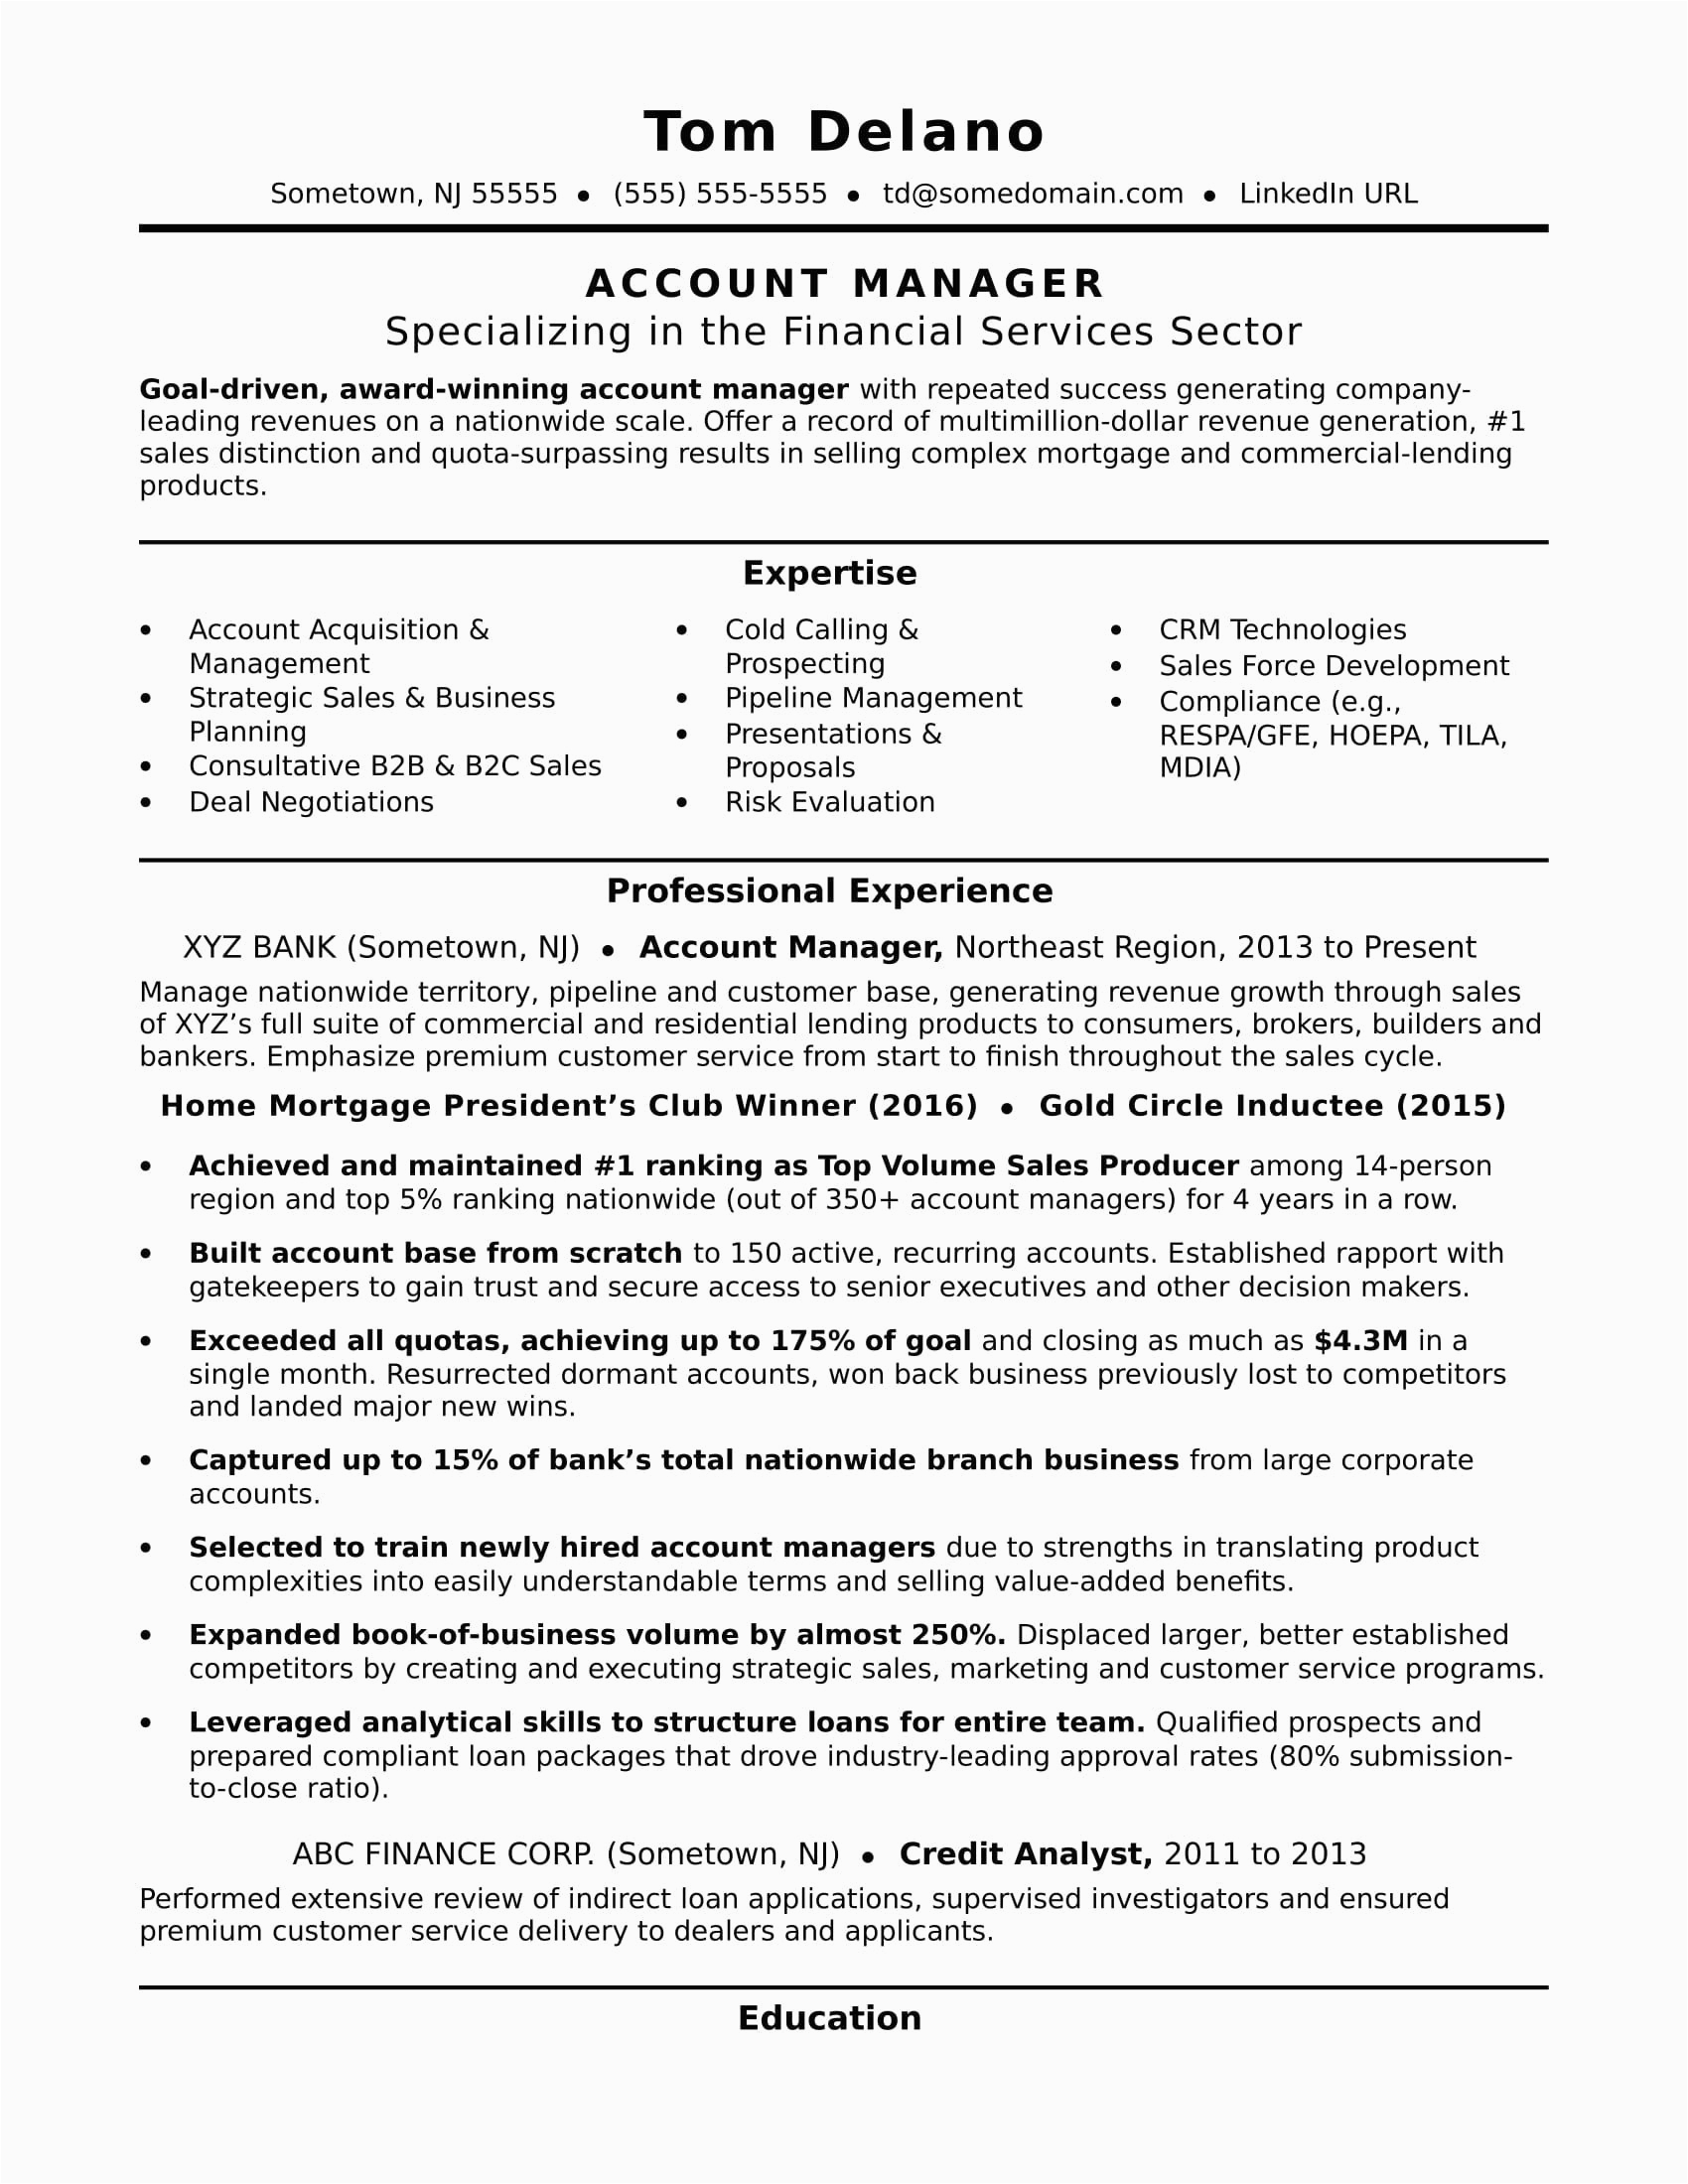 Accounts Manager Resume Sample In India Account Manager Resume Sample In India 2021